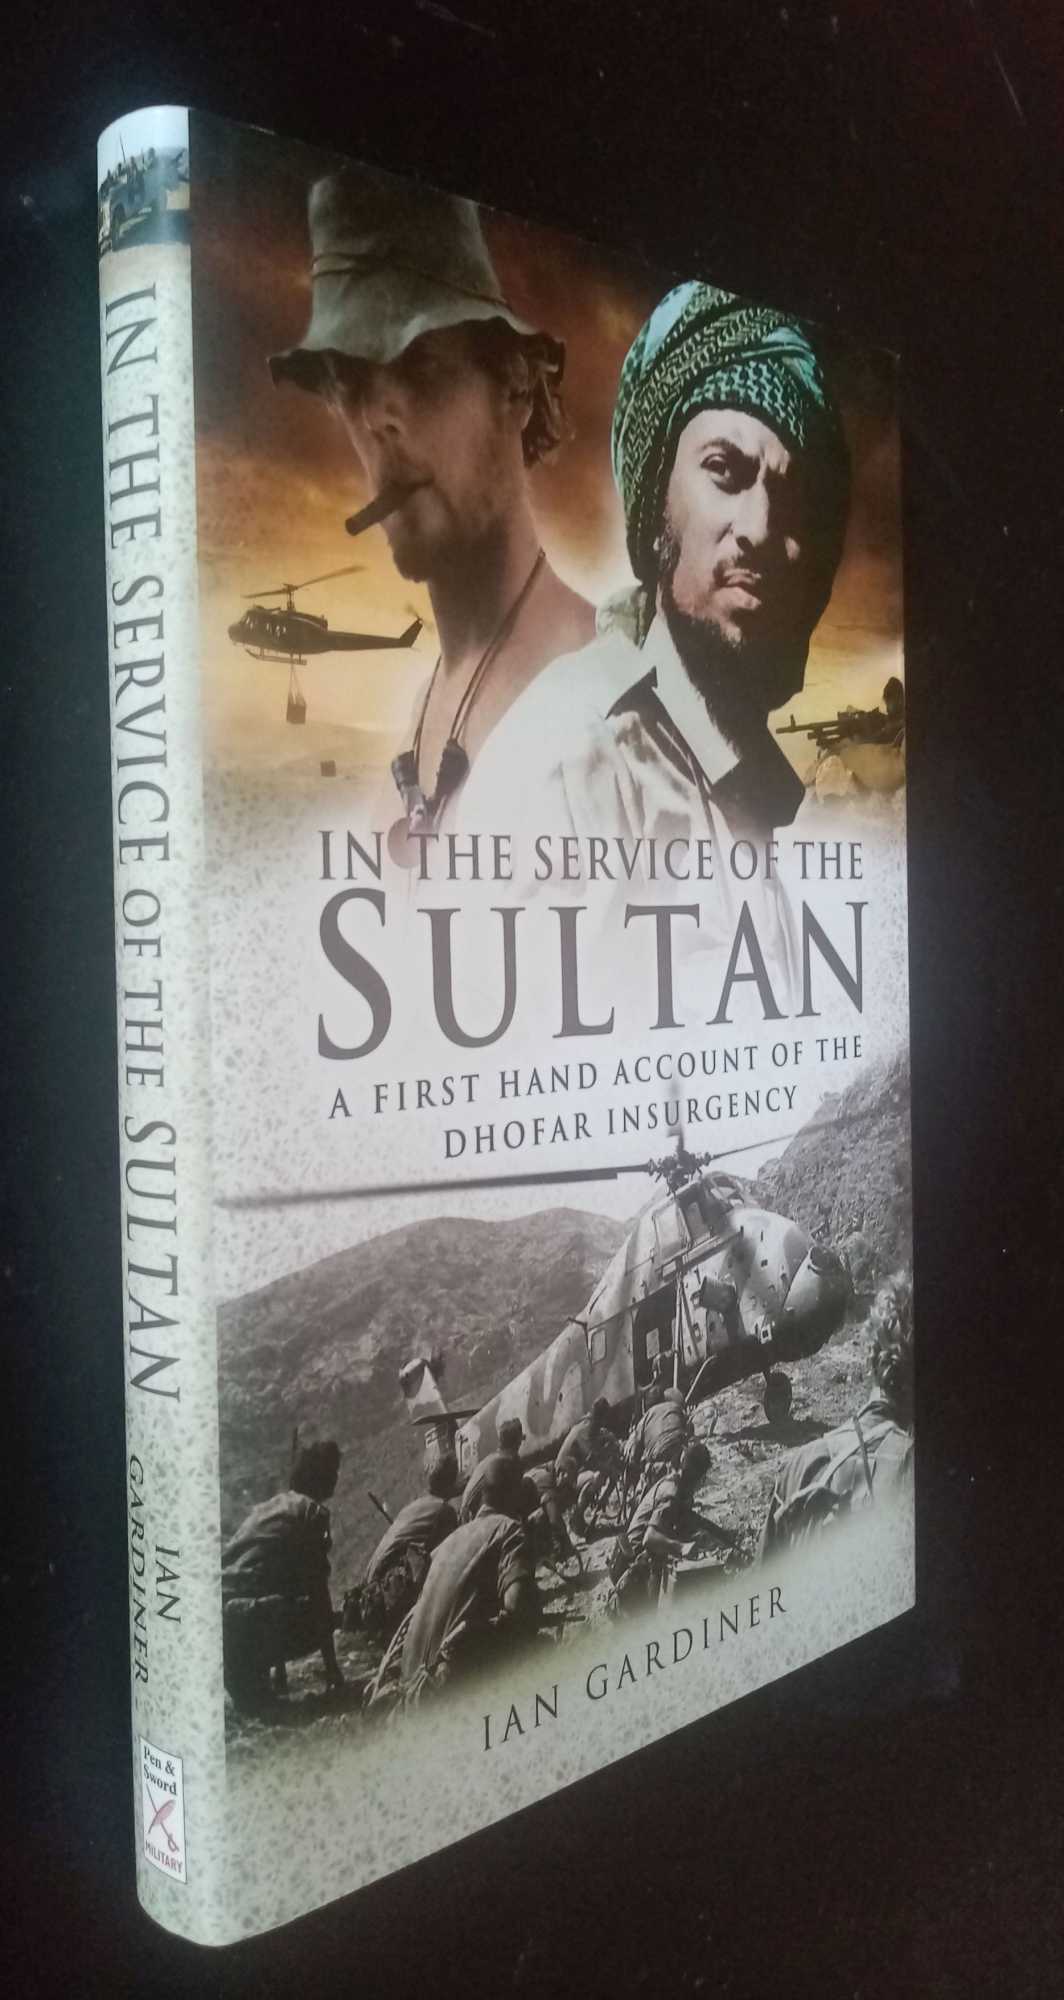 Ian Gardiner - In the Service of the Sultan: A First Hand Account of the Dhofar Insurgency  SIGNED/Inscribed